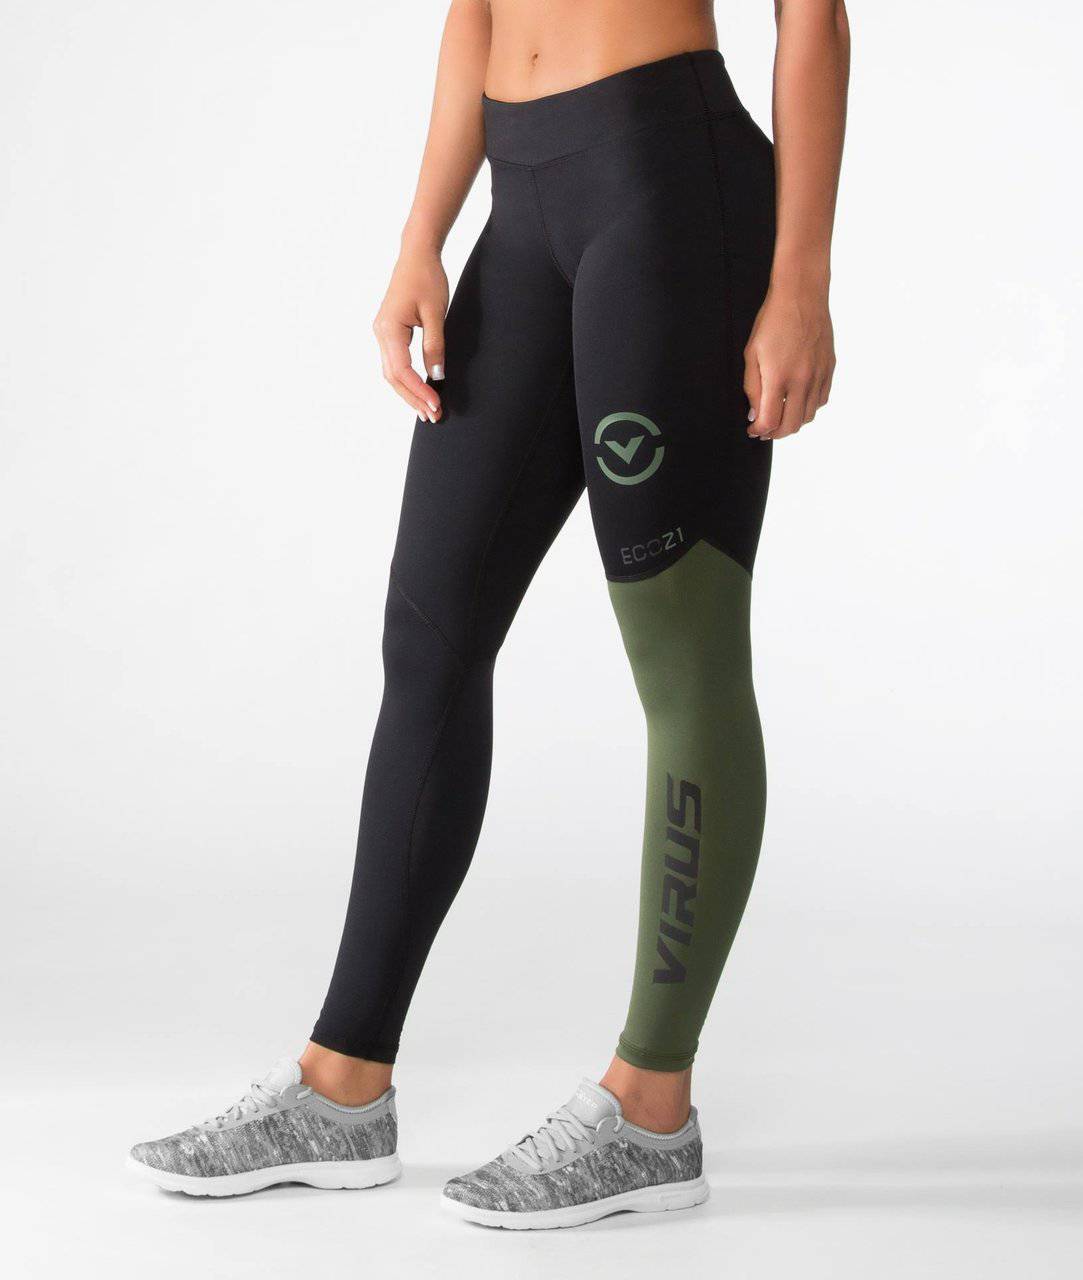 Women's Eco21.5 Compression Tech Pant. Available now in our Women's  Weightlifting BOGO Collection, Link in bio., @virusintl…